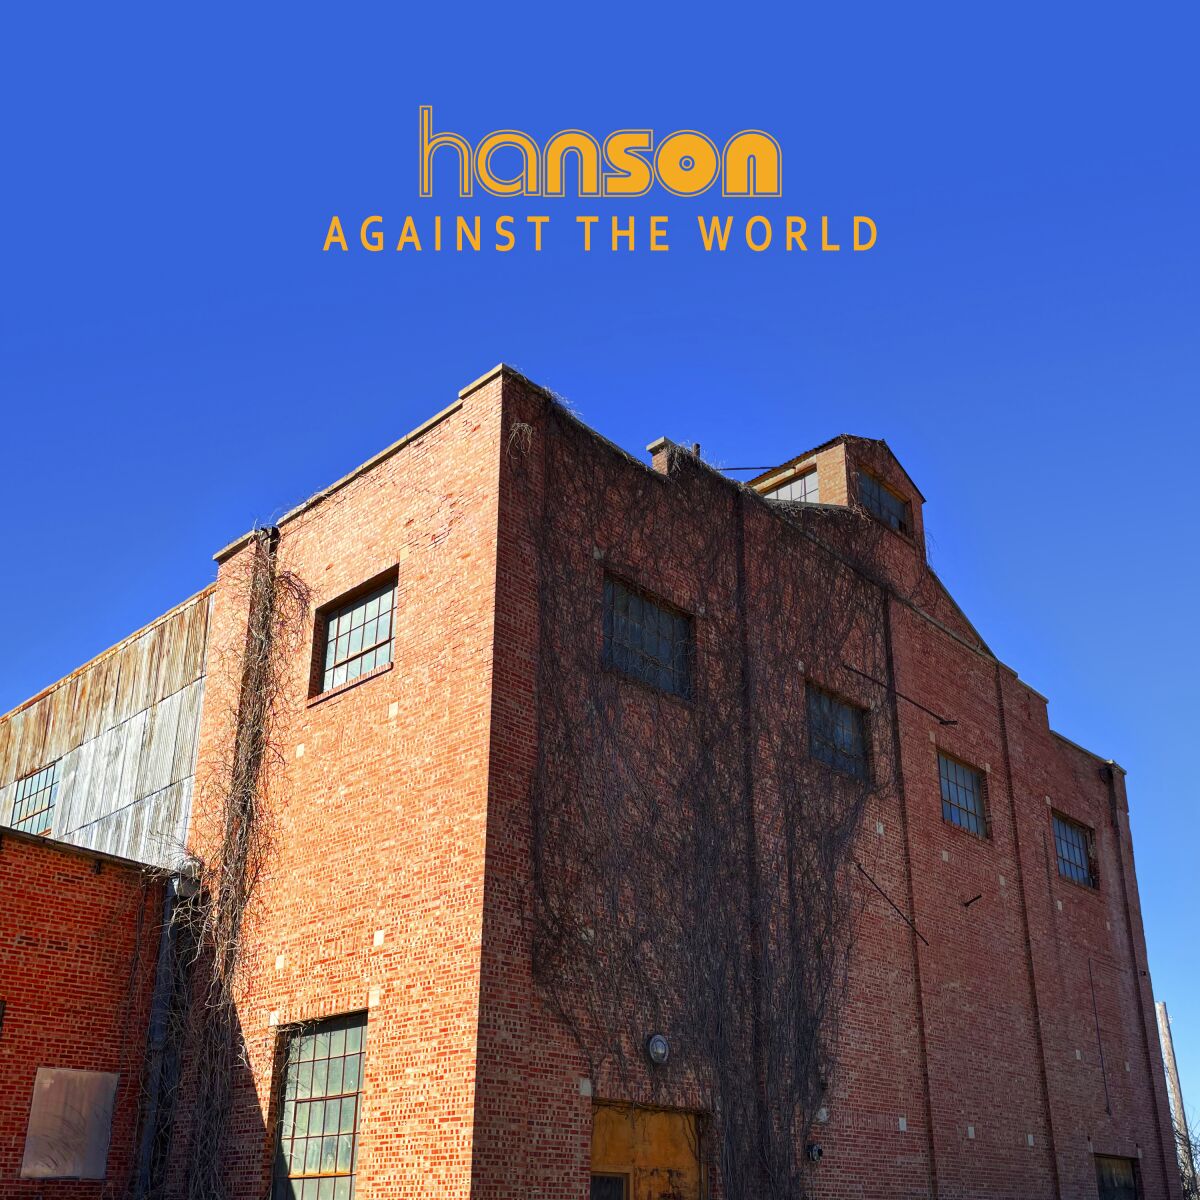 This cover image released by 3CG Records shows "Against the World" by Hanson. (3CG Records via AP)